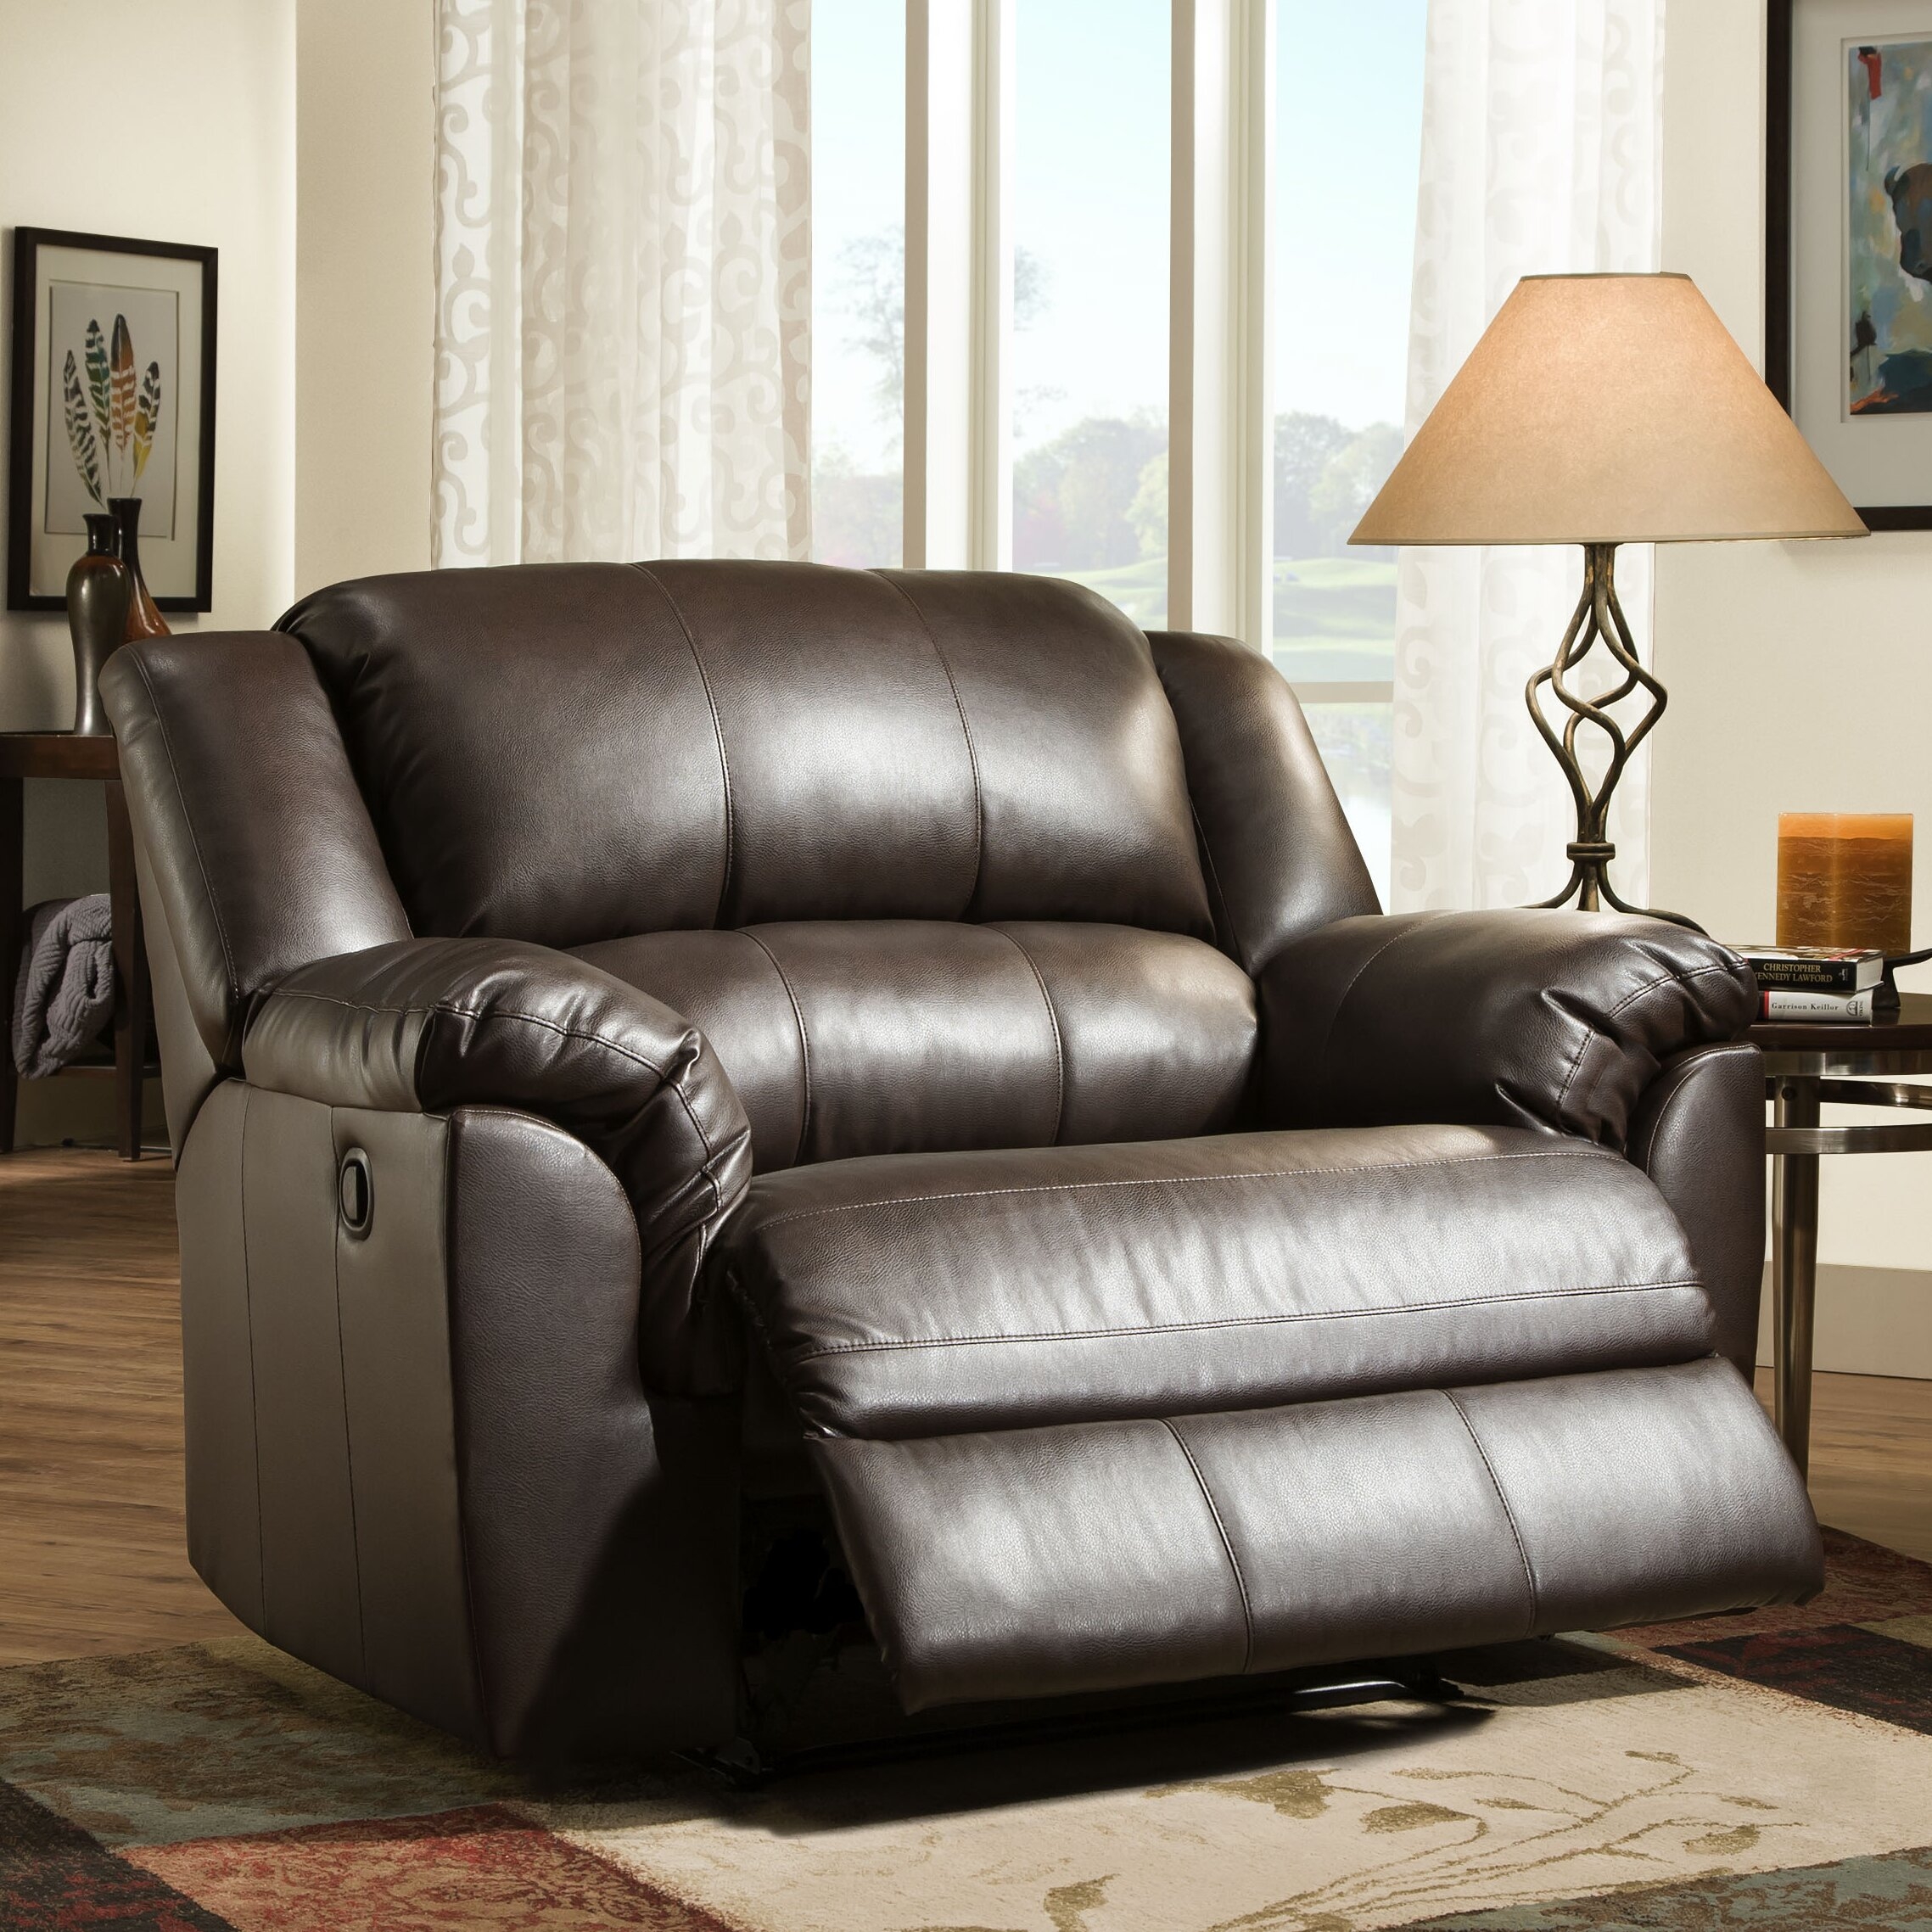 Oversized Rocker Recliner Visualhunt, Oversized Leather Recliners